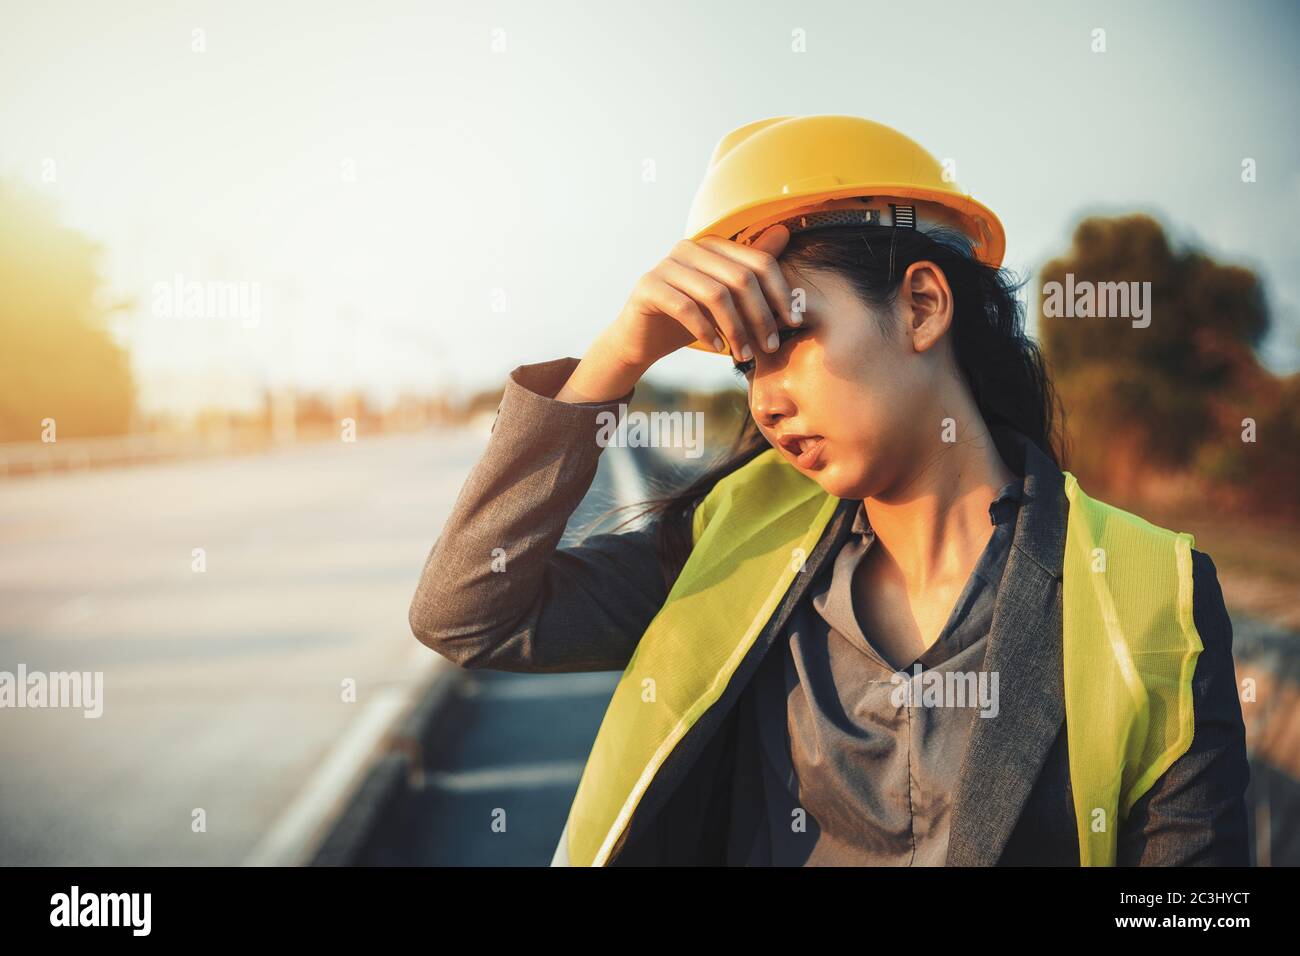 engineer women wipe sweat and hot weather at site construction. Stock Photo